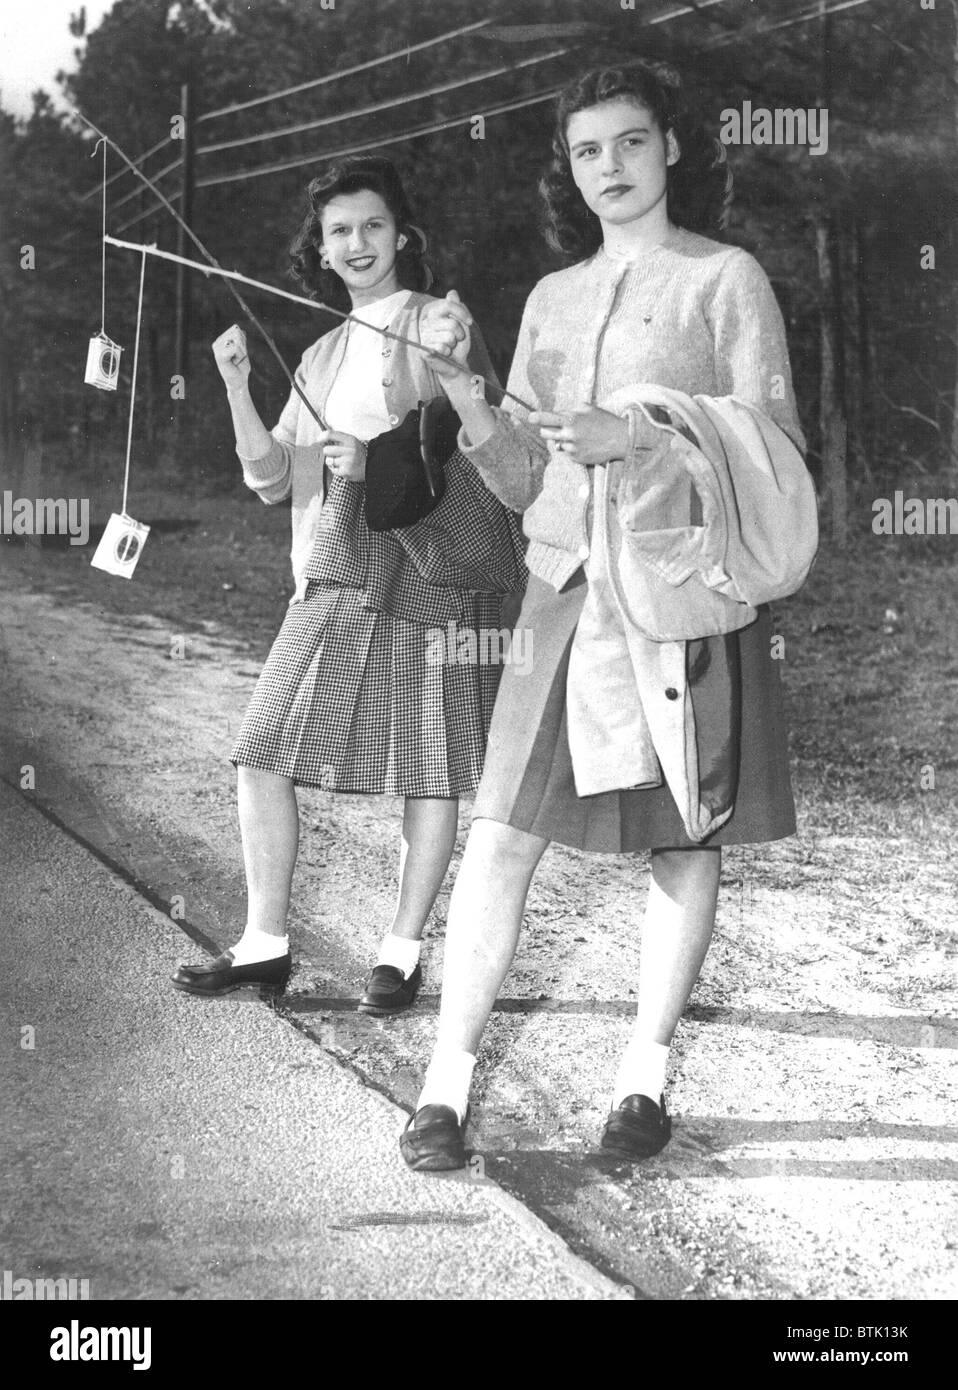 Jane Piazza and Jackie B Canepa hitchhike by waving whole packages of rare cigarettes at passing cars, Newsport News, VA, 3/20/1 Stock Photo